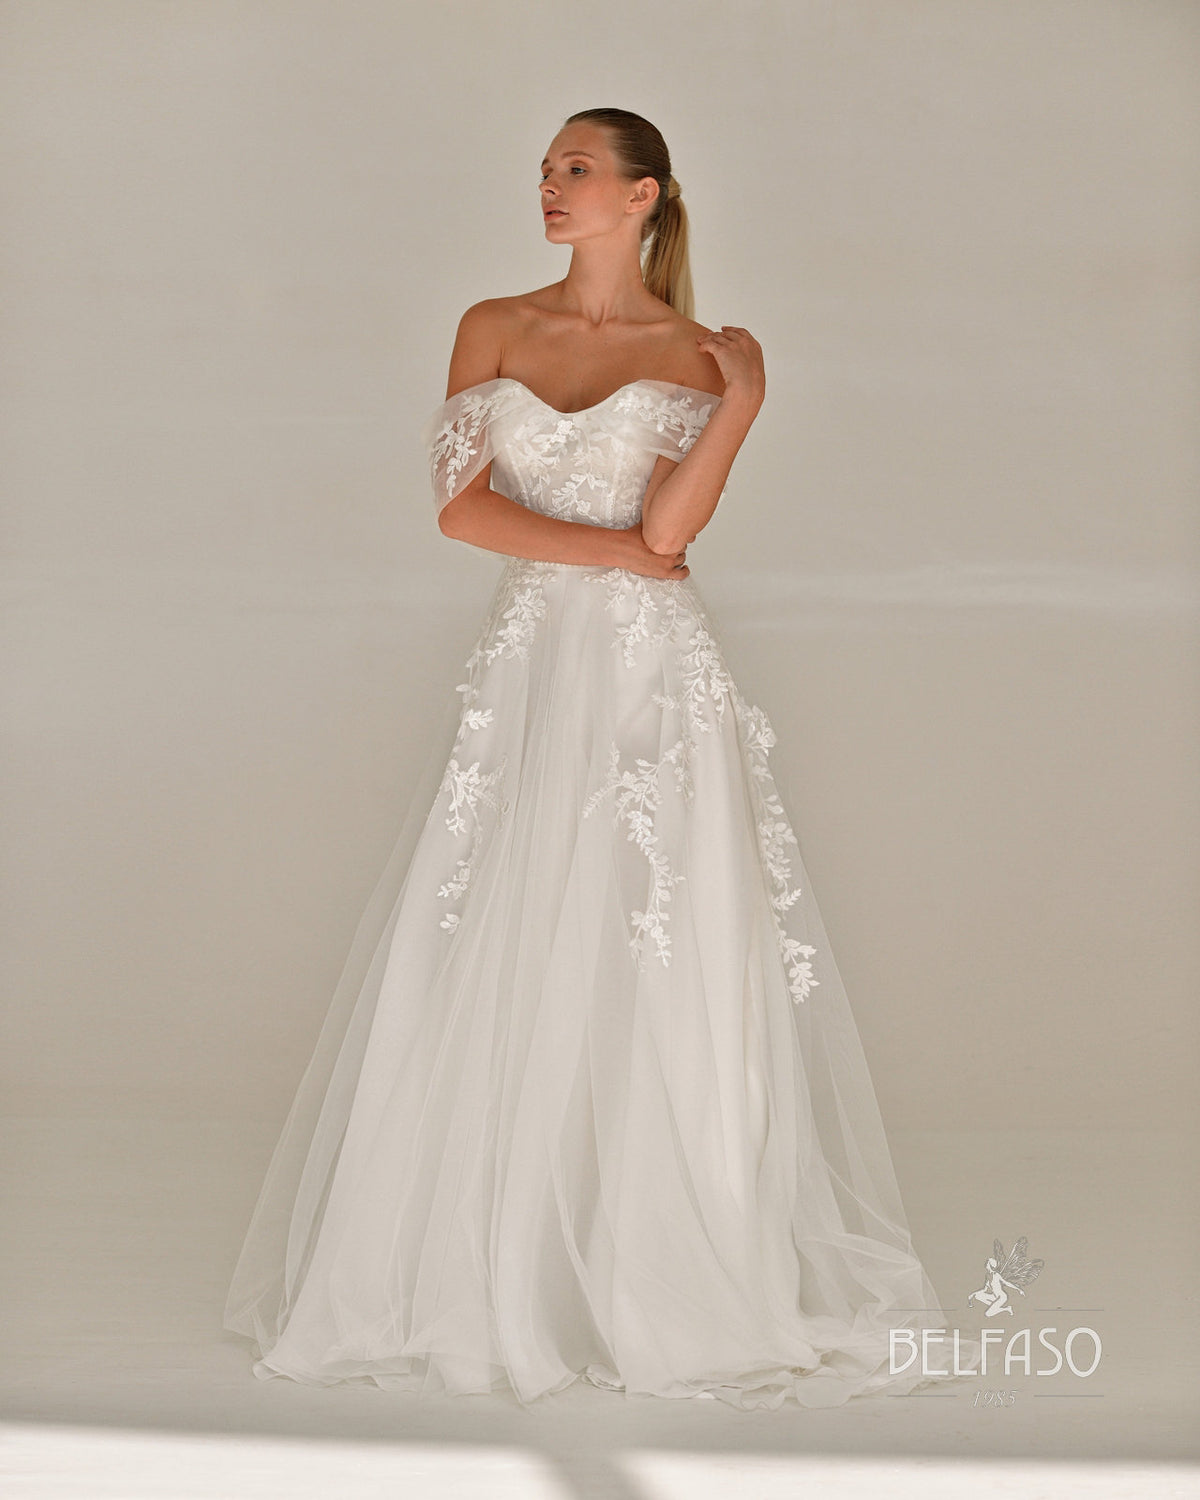 Elegant Off the Shoulder Wedding Dress Bridal Gown Flowing Aline Silhouette, Featuring Floral Lace and Sweetheart Neckline